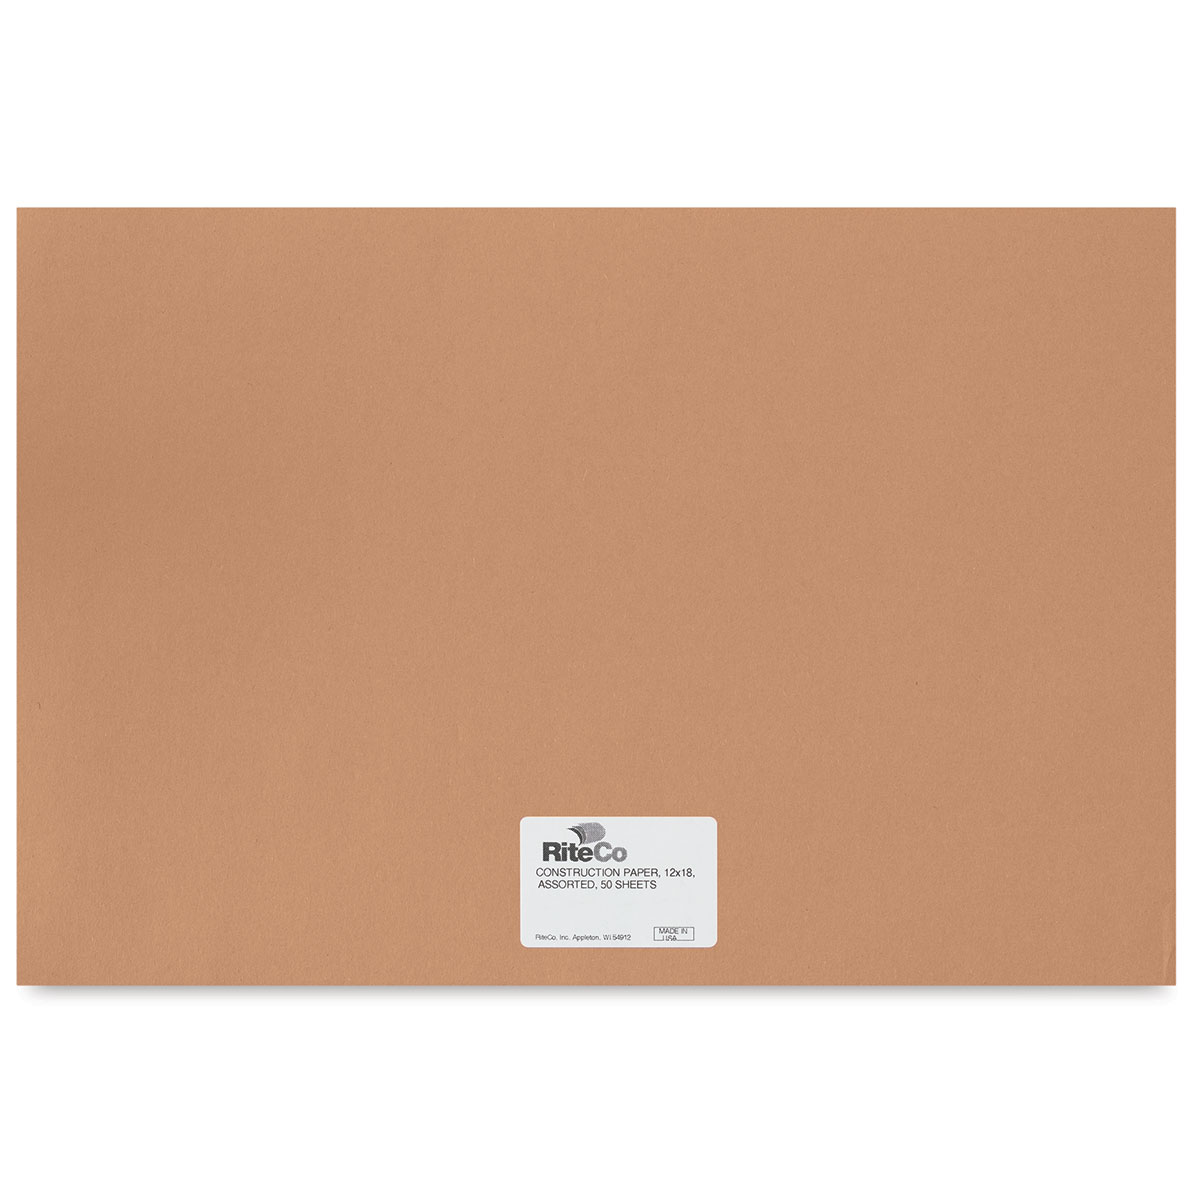 Riteco Construction Paper - Light Brown, 9 inch x 12 inch, 50 Sheets